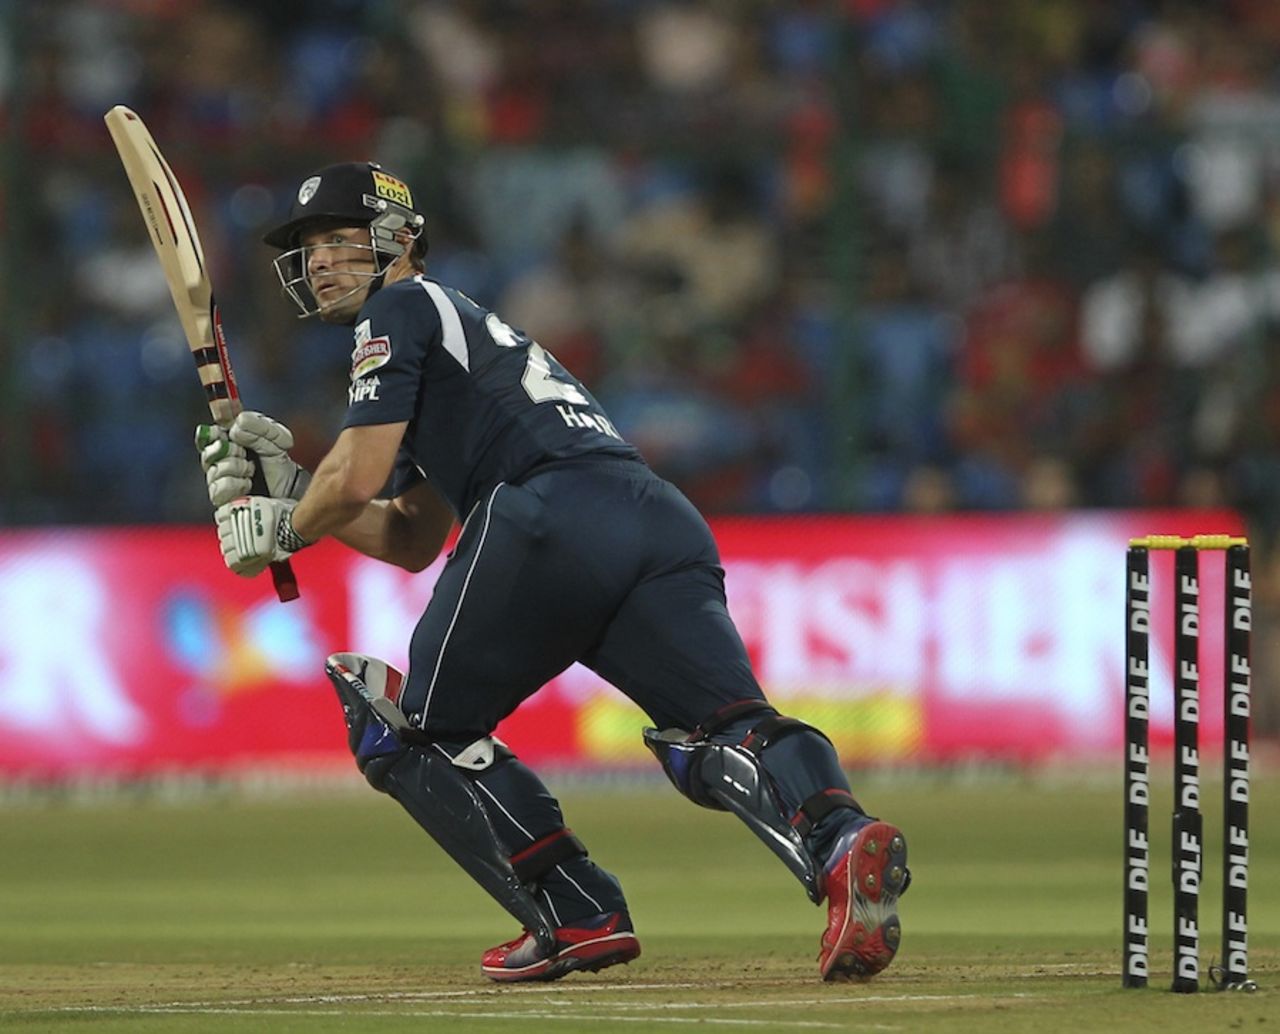 Daniel Harris scored 47 in his second game this season, Royal Challengers Bangalore v Deccan Chargers, IPL 2012, May 6, 2012